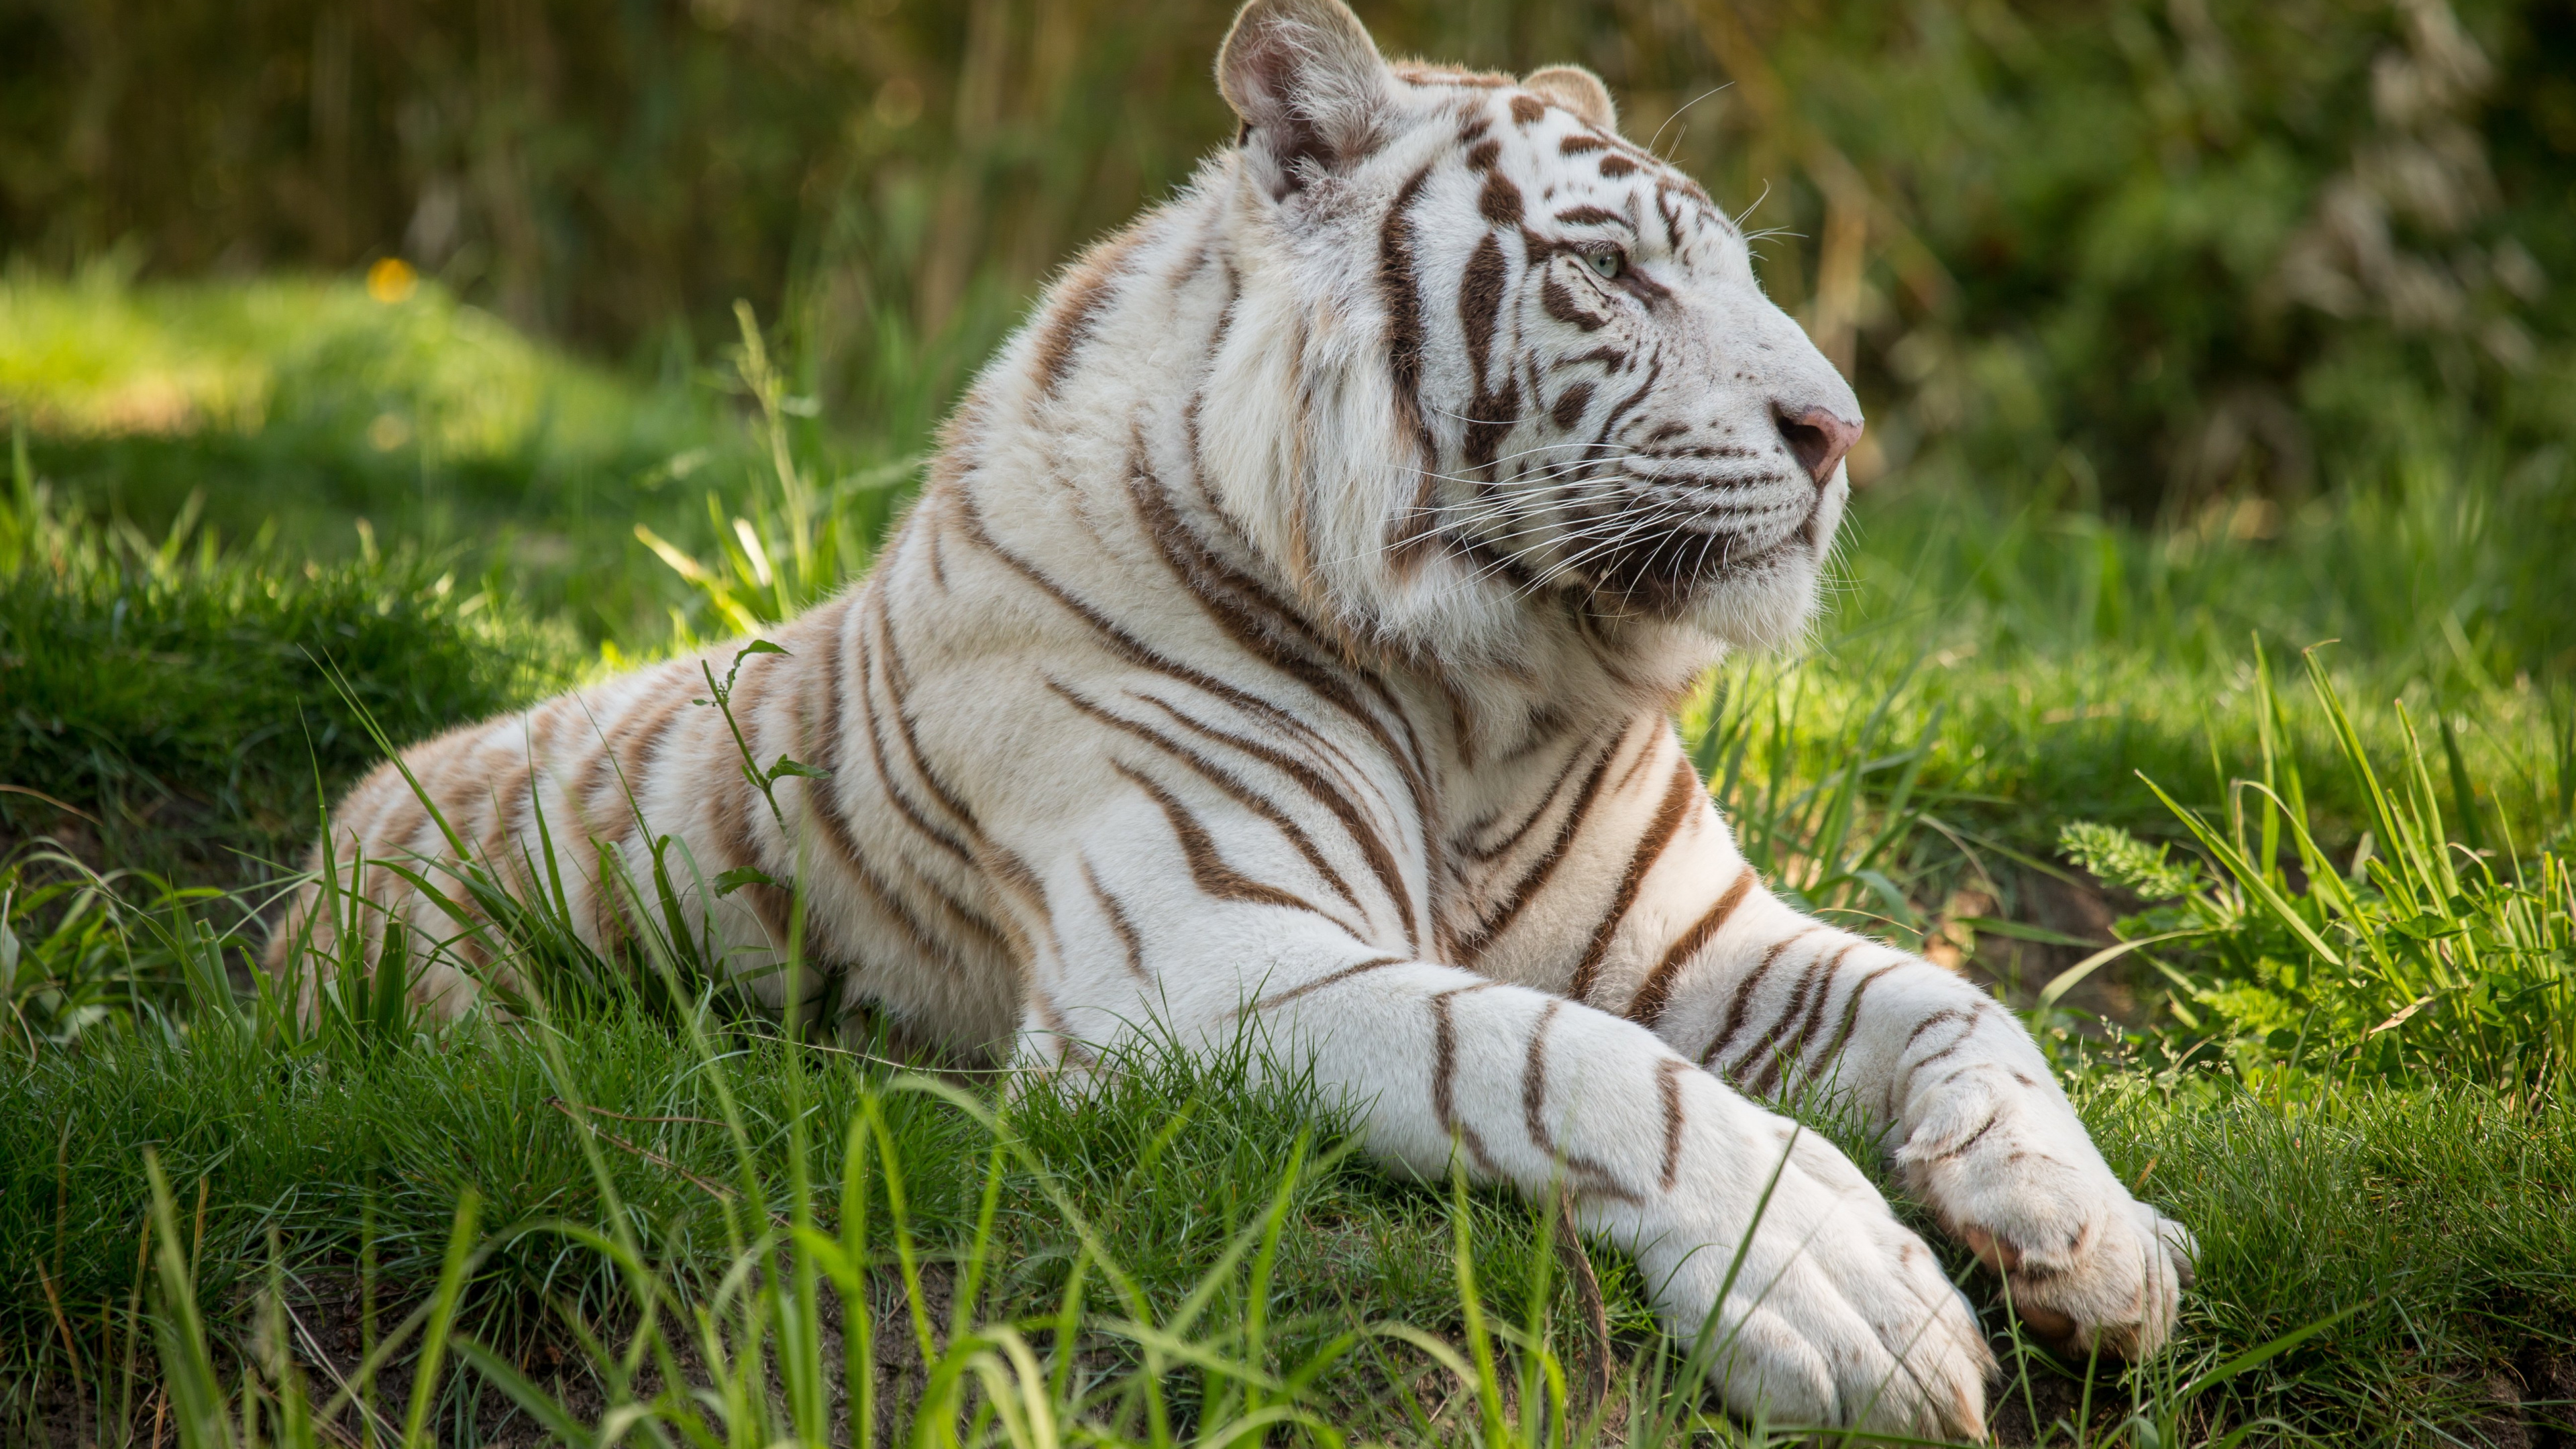 White and Black Tiger Lying on Green Grass During Daytime. Wallpaper in 3840x2160 Resolution